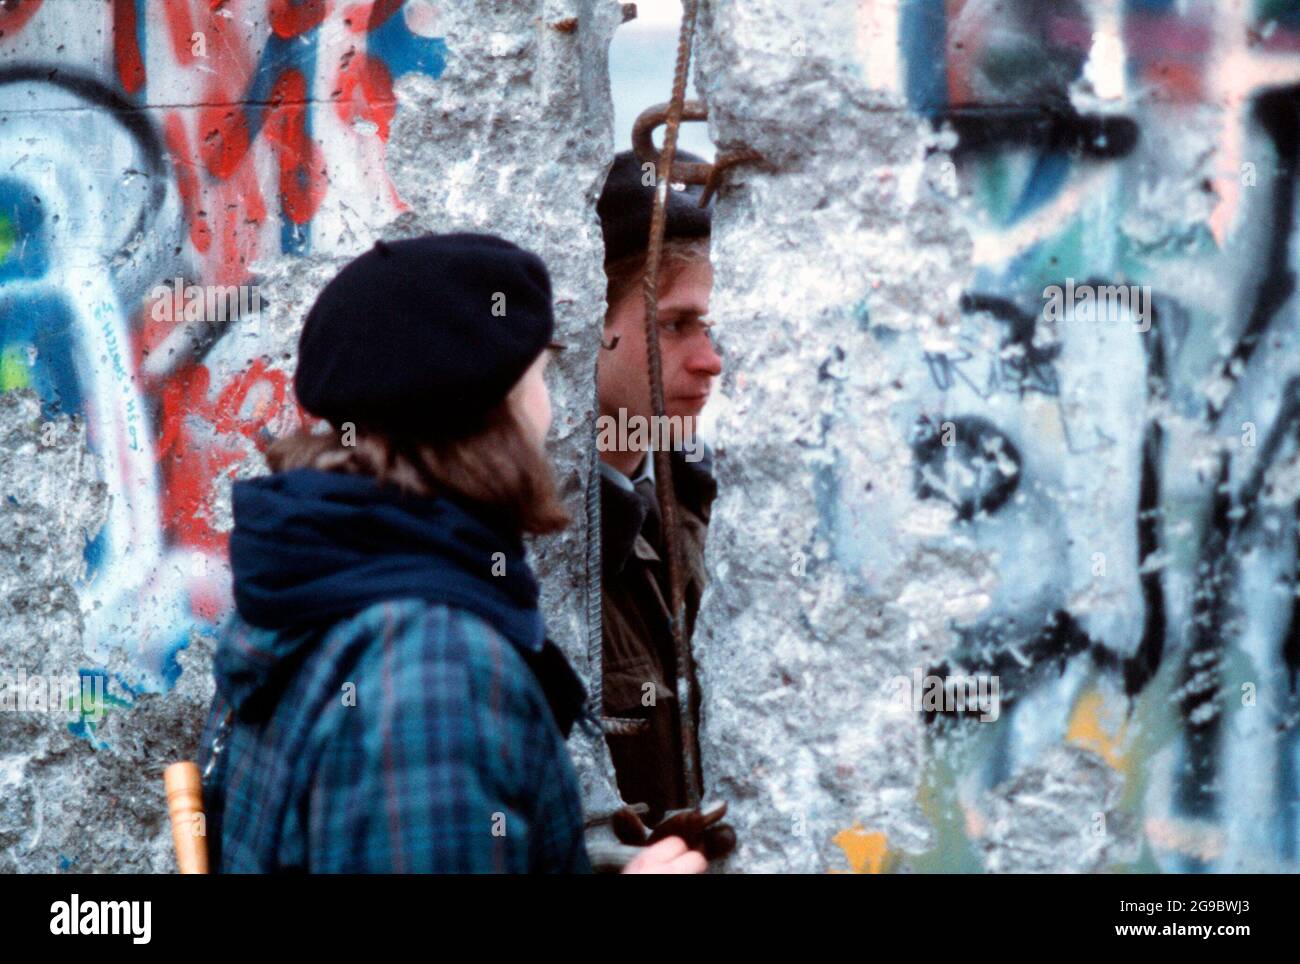 A West German girl speaks with an East German guard through an opening in the Berlin Wall, circa 1980s Stock Photo